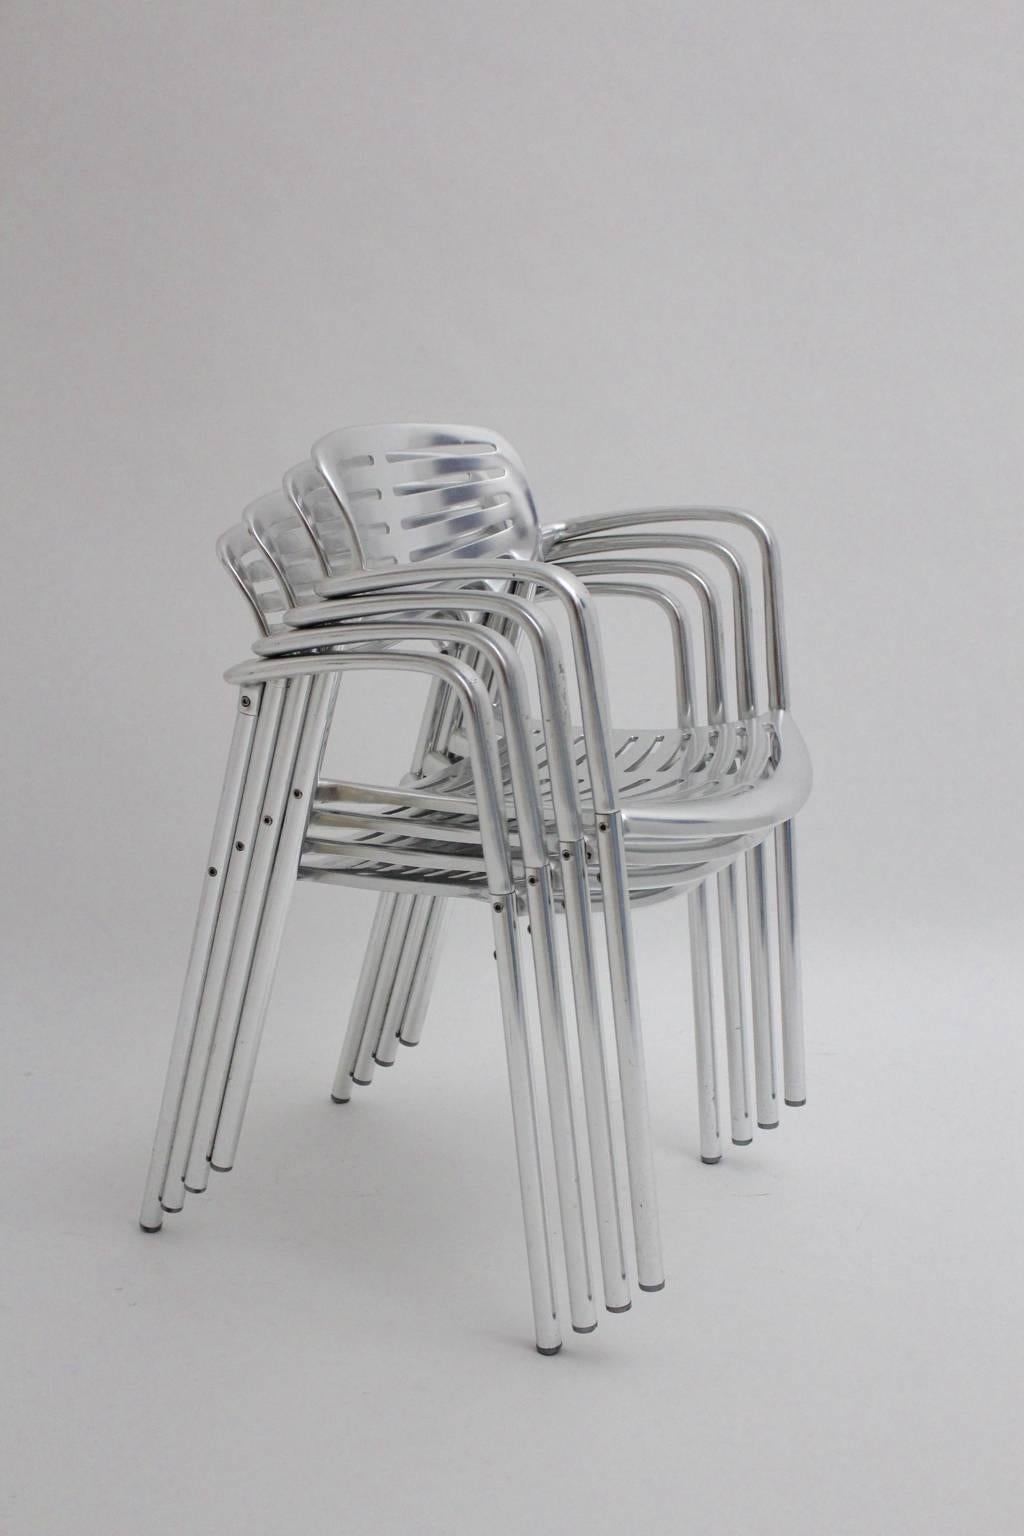 Spanish Modern Aluminum Stacking Chairs Garden Chairs Dining Chairs Jorge Pensi 1980s For Sale